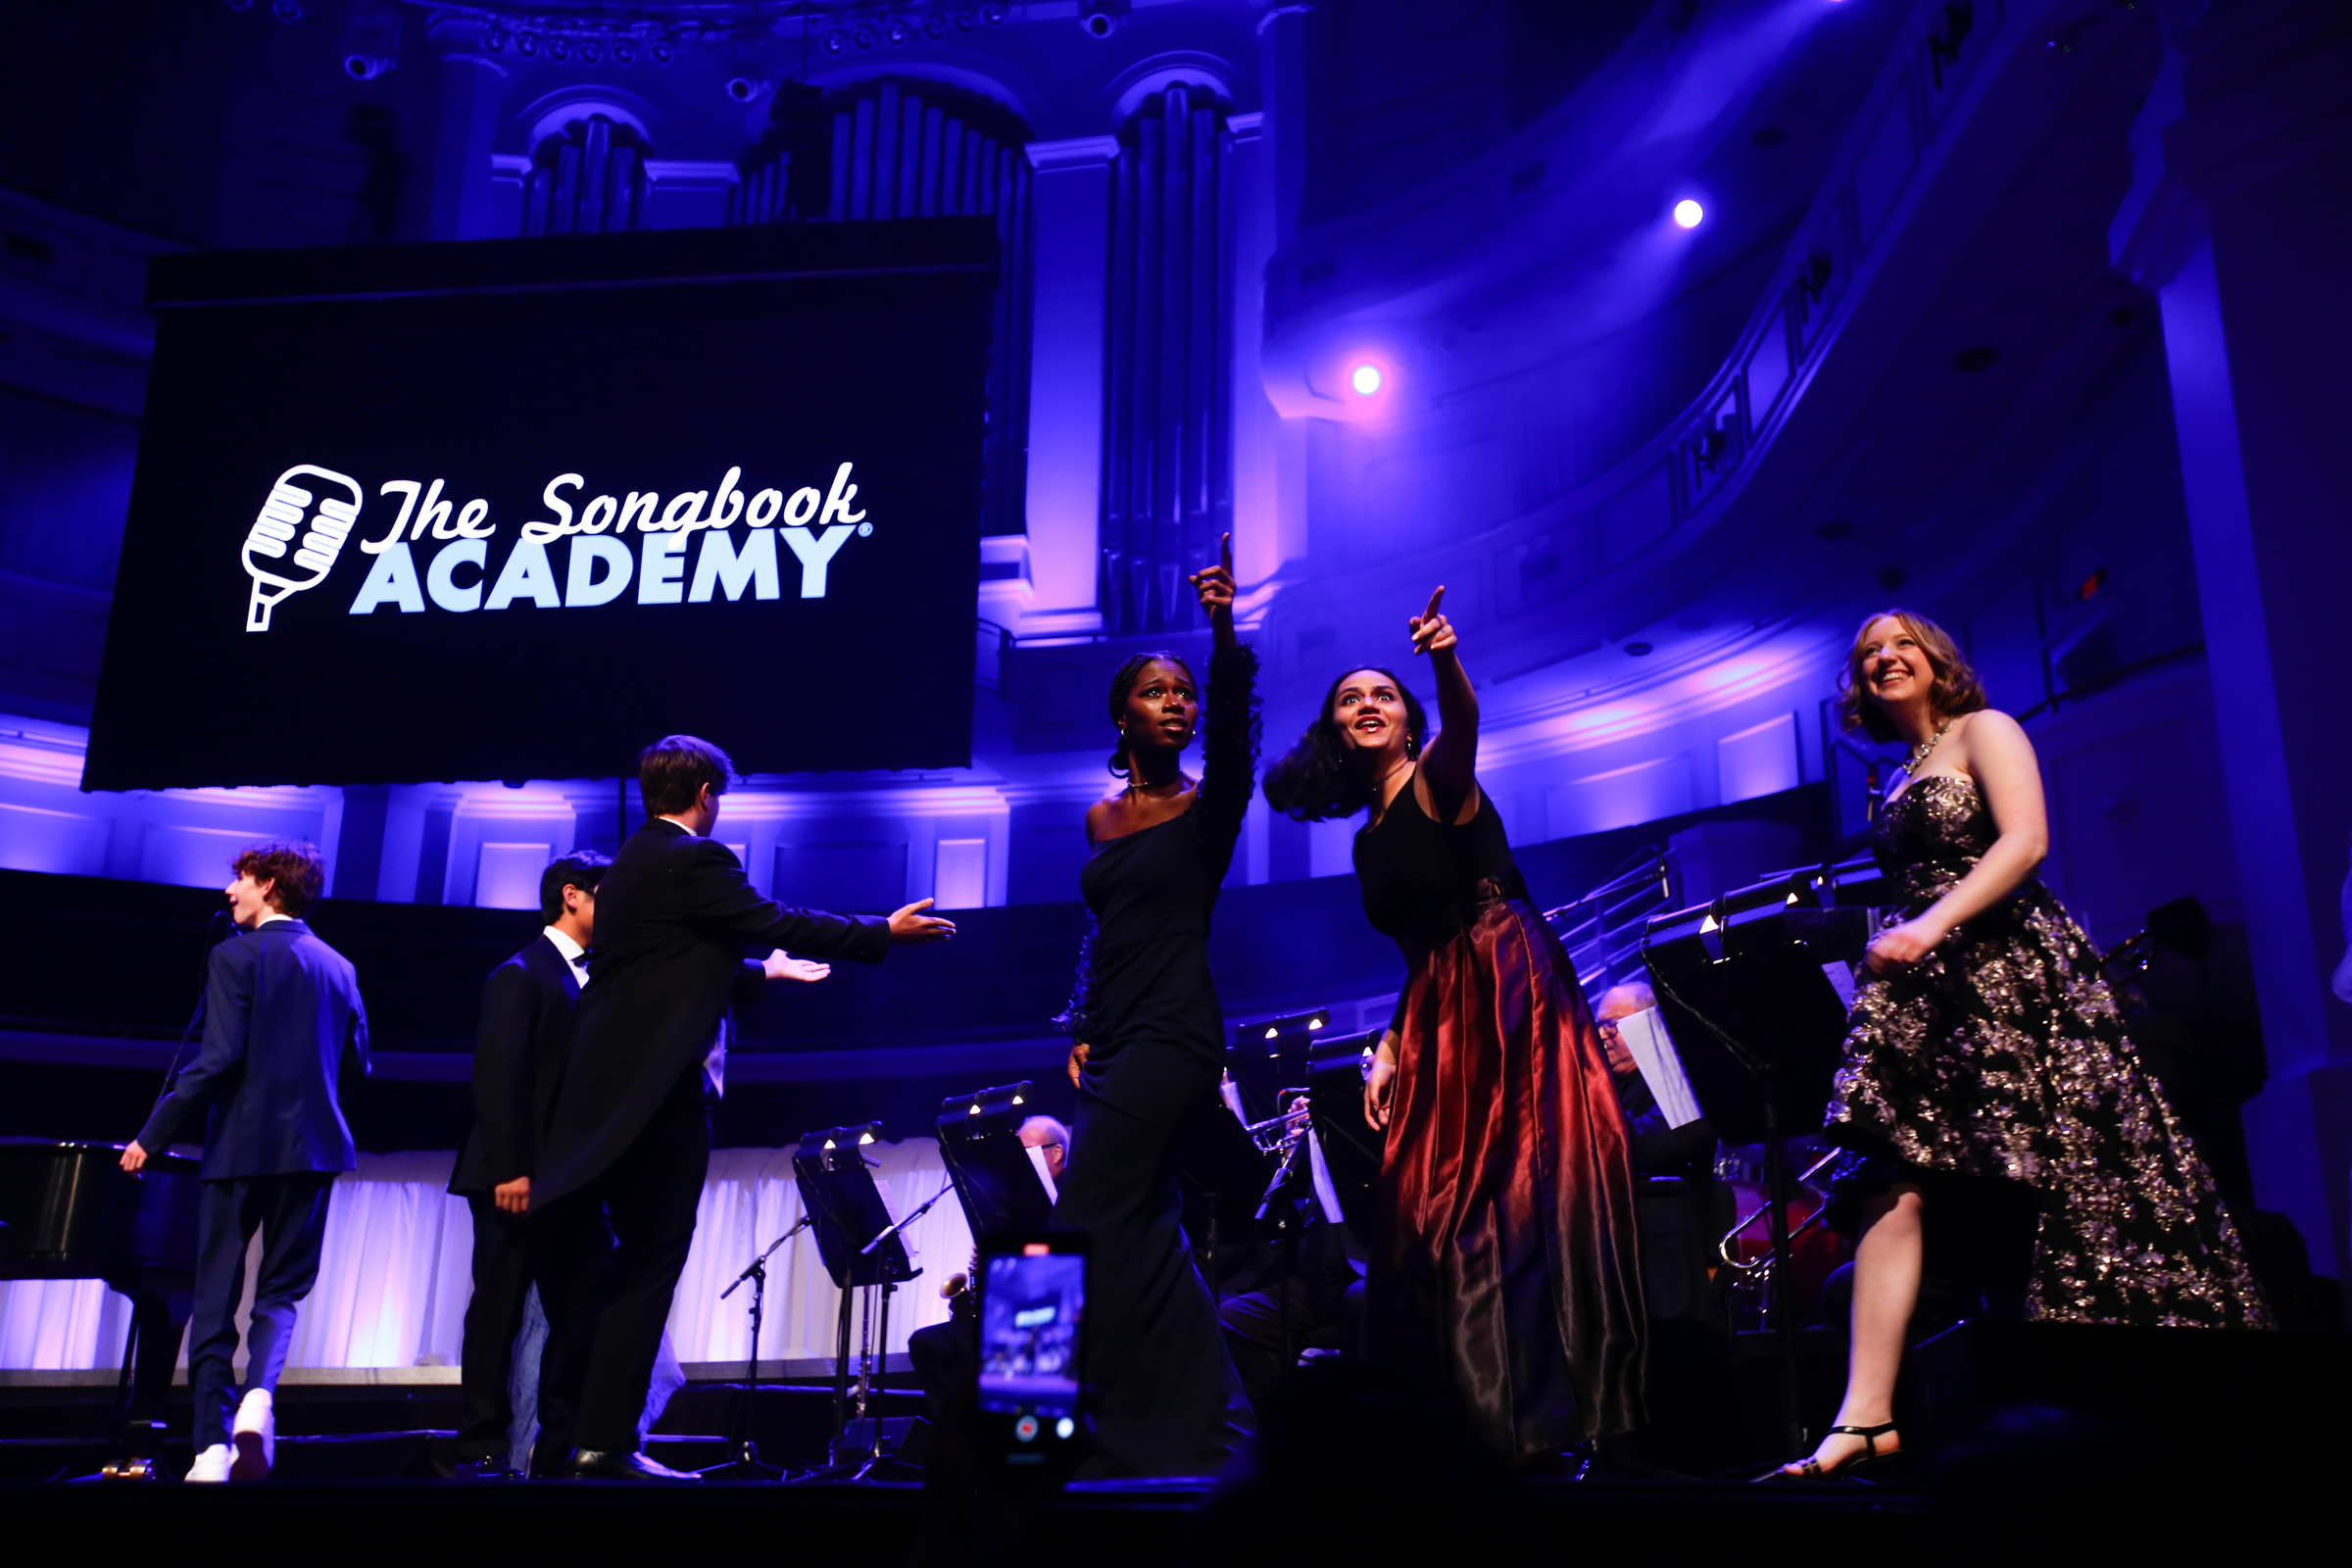 Teen singers in evening wear point at the audience as they walk onstage during the annual Songbook Academy final concert.